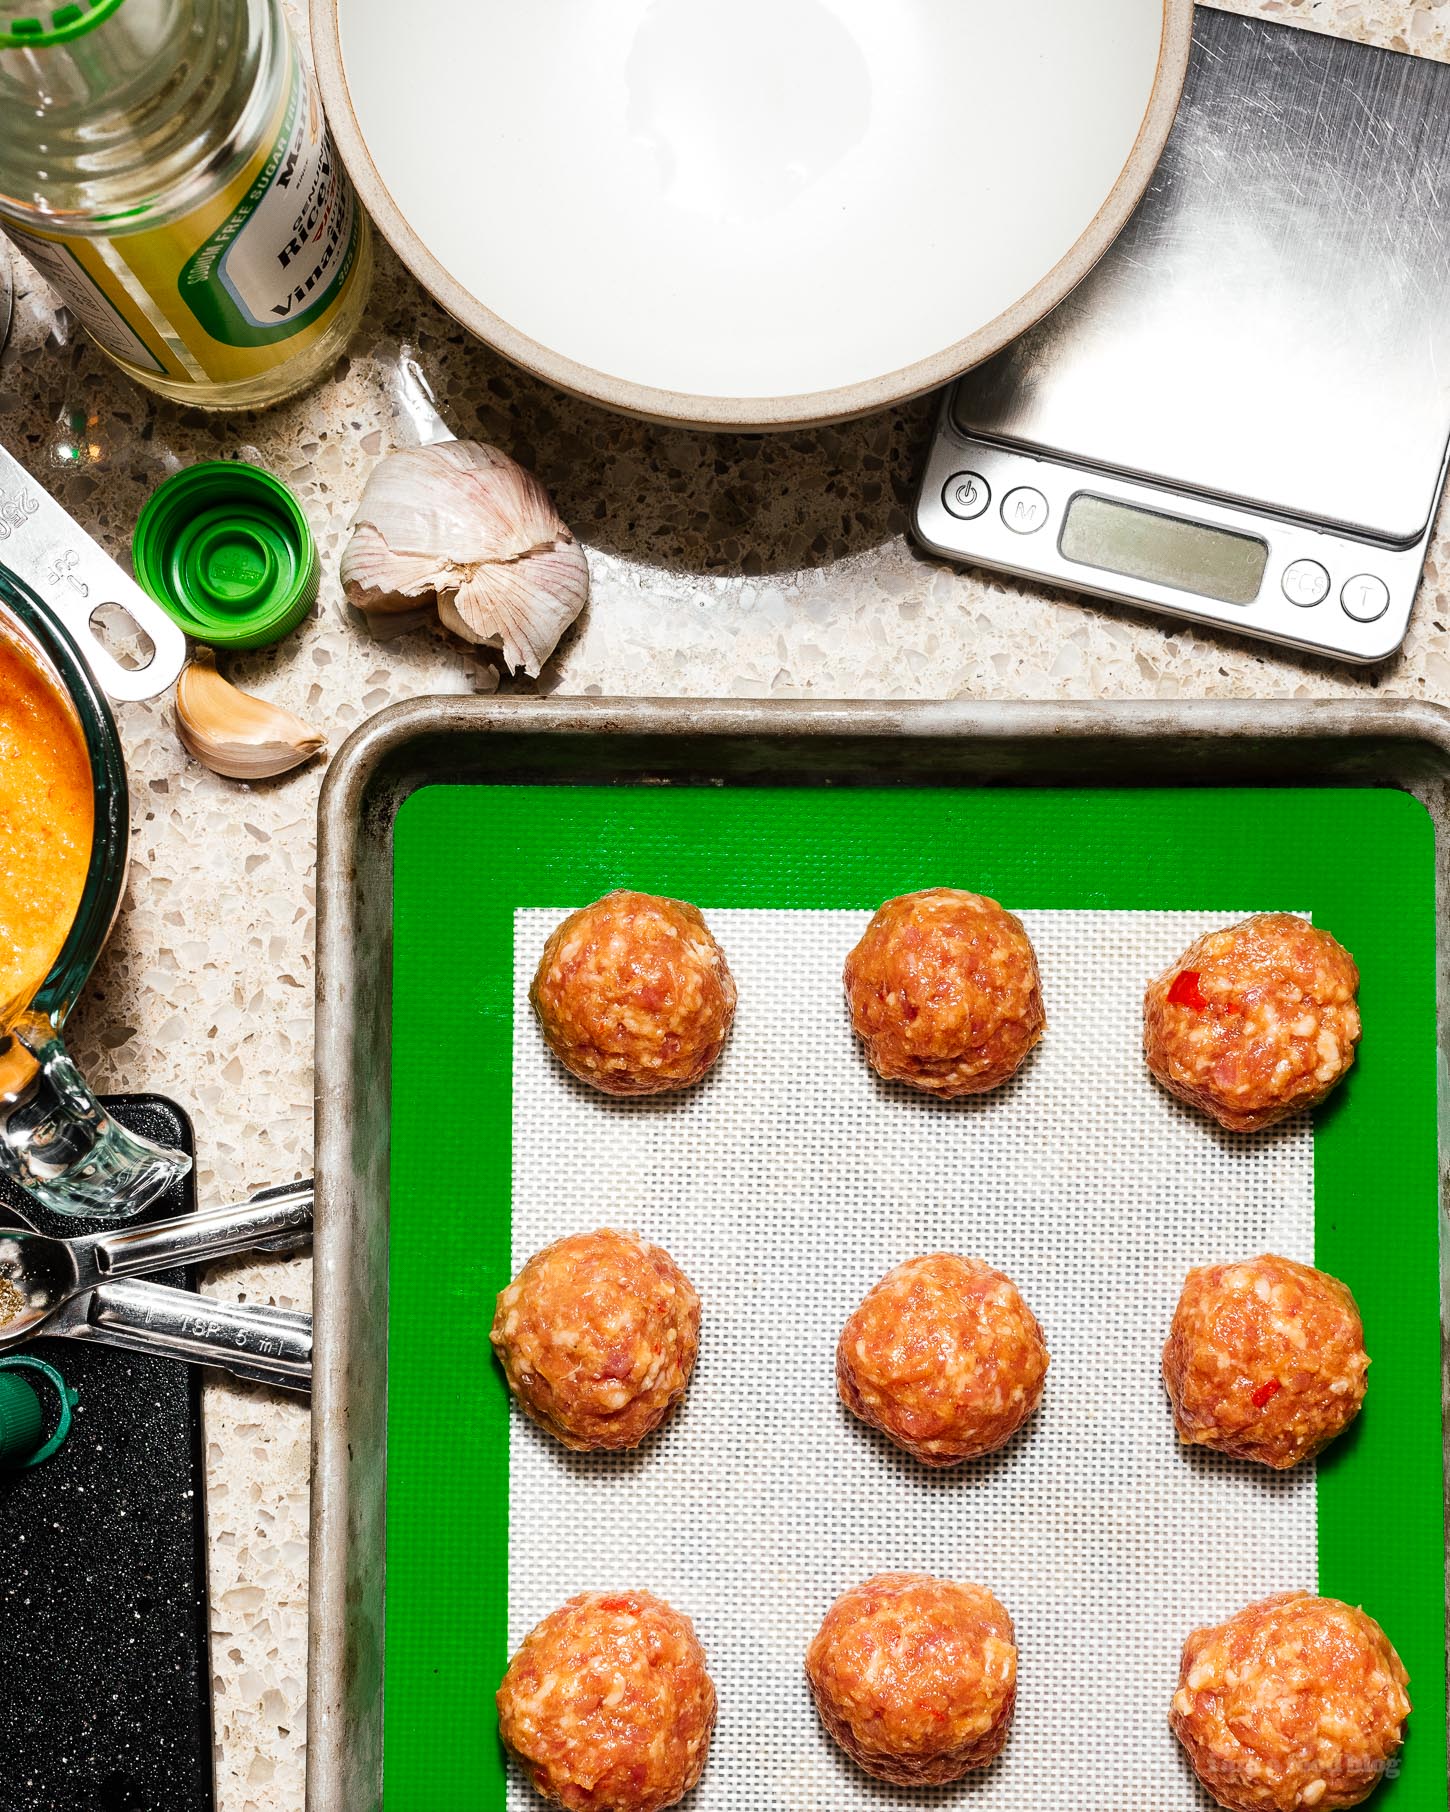 These low carb, keto friendly piri piri pork meatballs bring the spice and flavor. They’re baked in the oven for maximum ease and are served with cooling Greek yogurt for a tangy, creamy contrast. No more breadcrumbs! #piripiri #meatballs #recipes #dinner #bakedmeatballs #lowcarb #keto #ketorecipes #ketofriendly